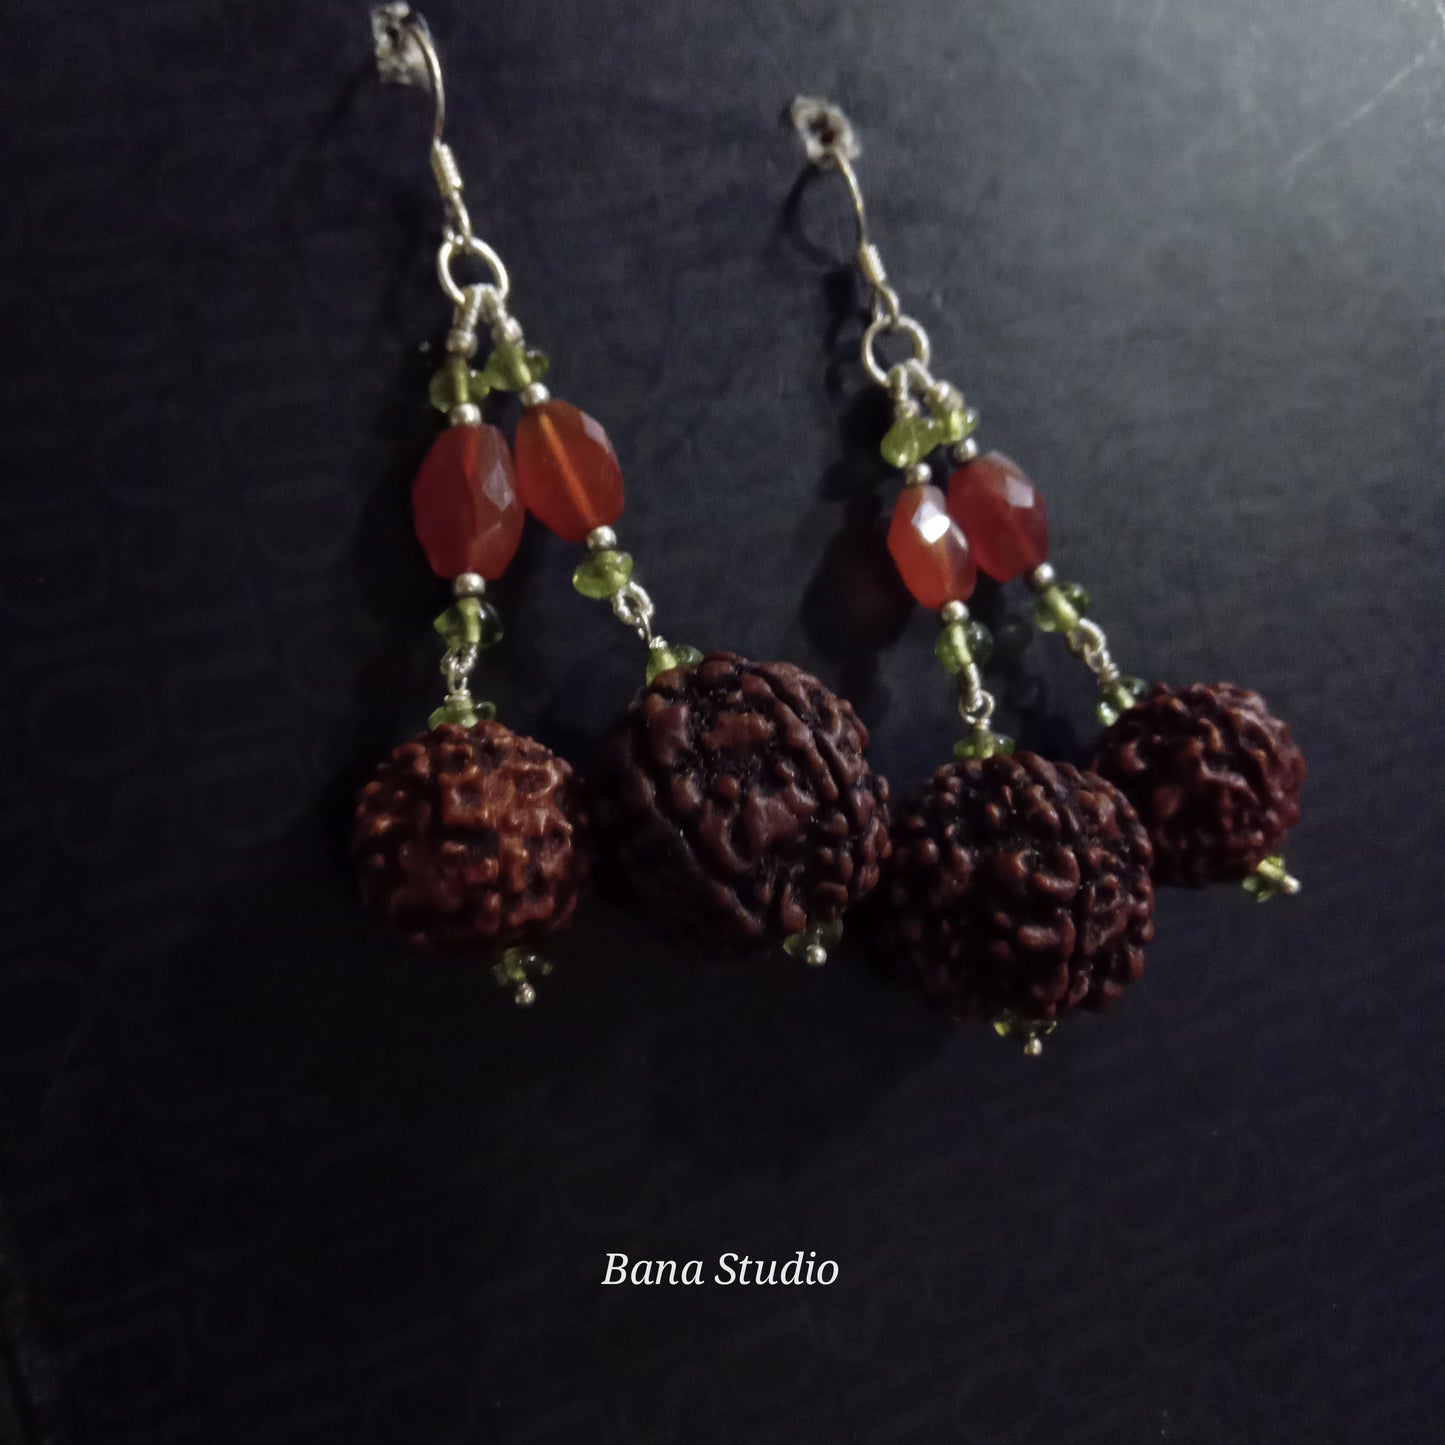 Made up Earrings